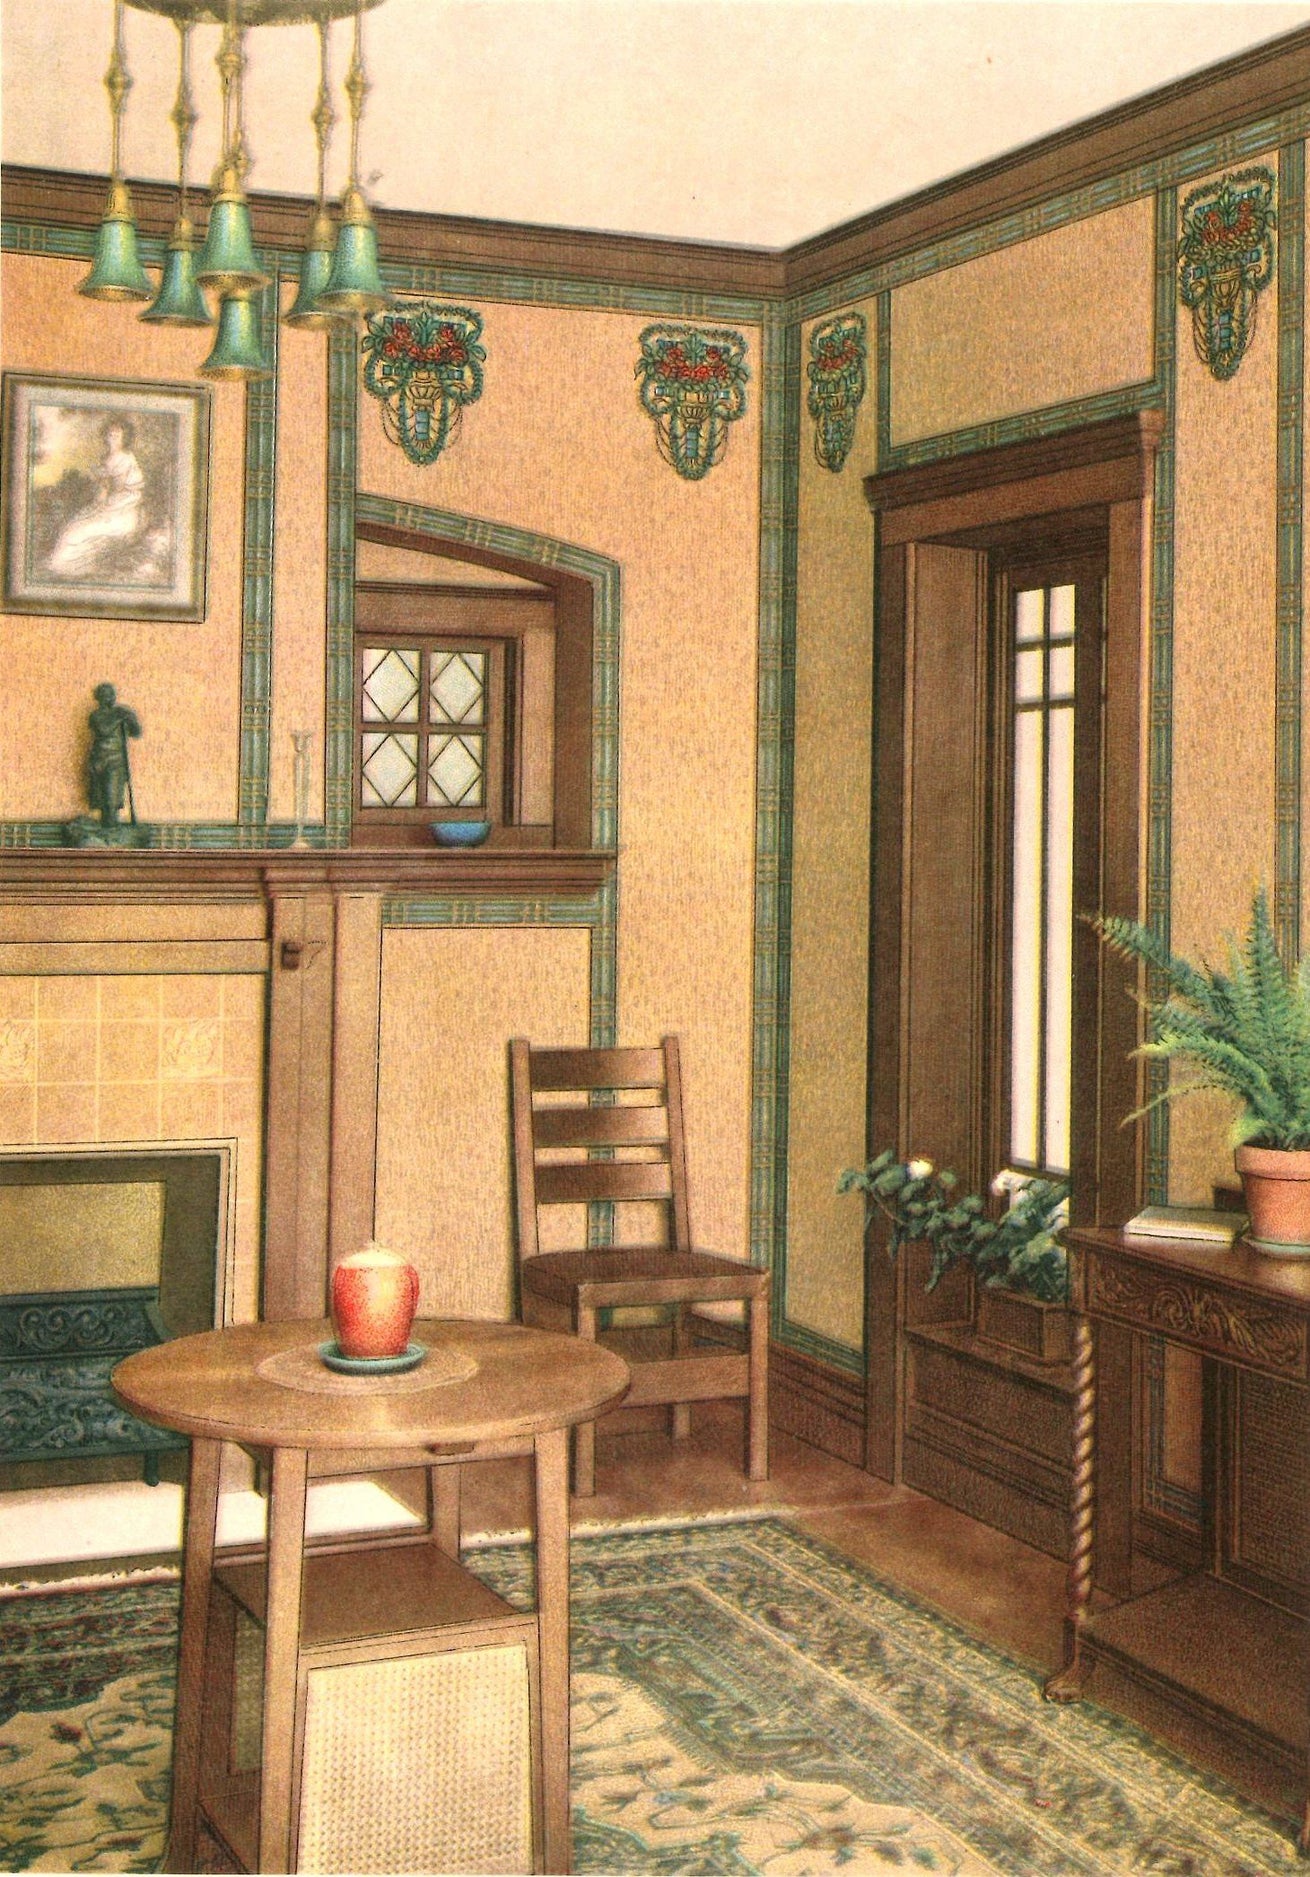 1913-14 Interior from Decorative Suggestions